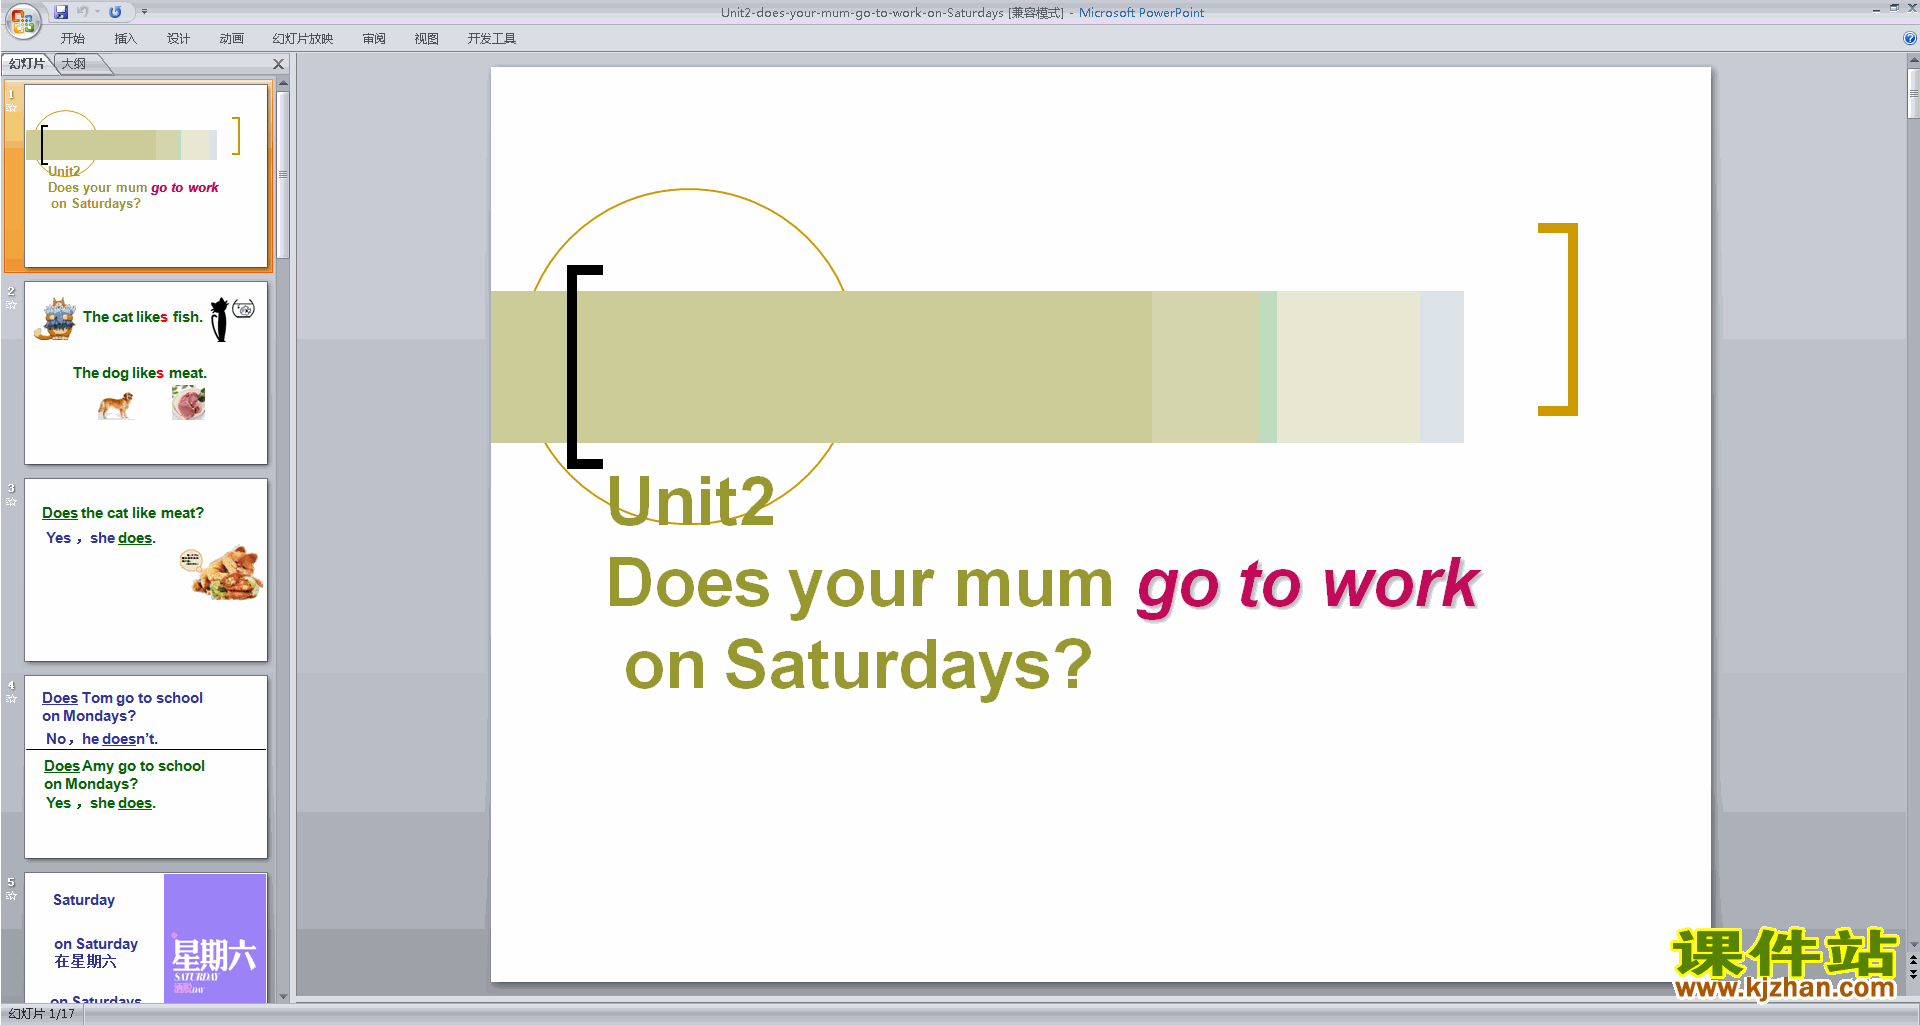 пDoes your mum go to work on Saturdays pptμ